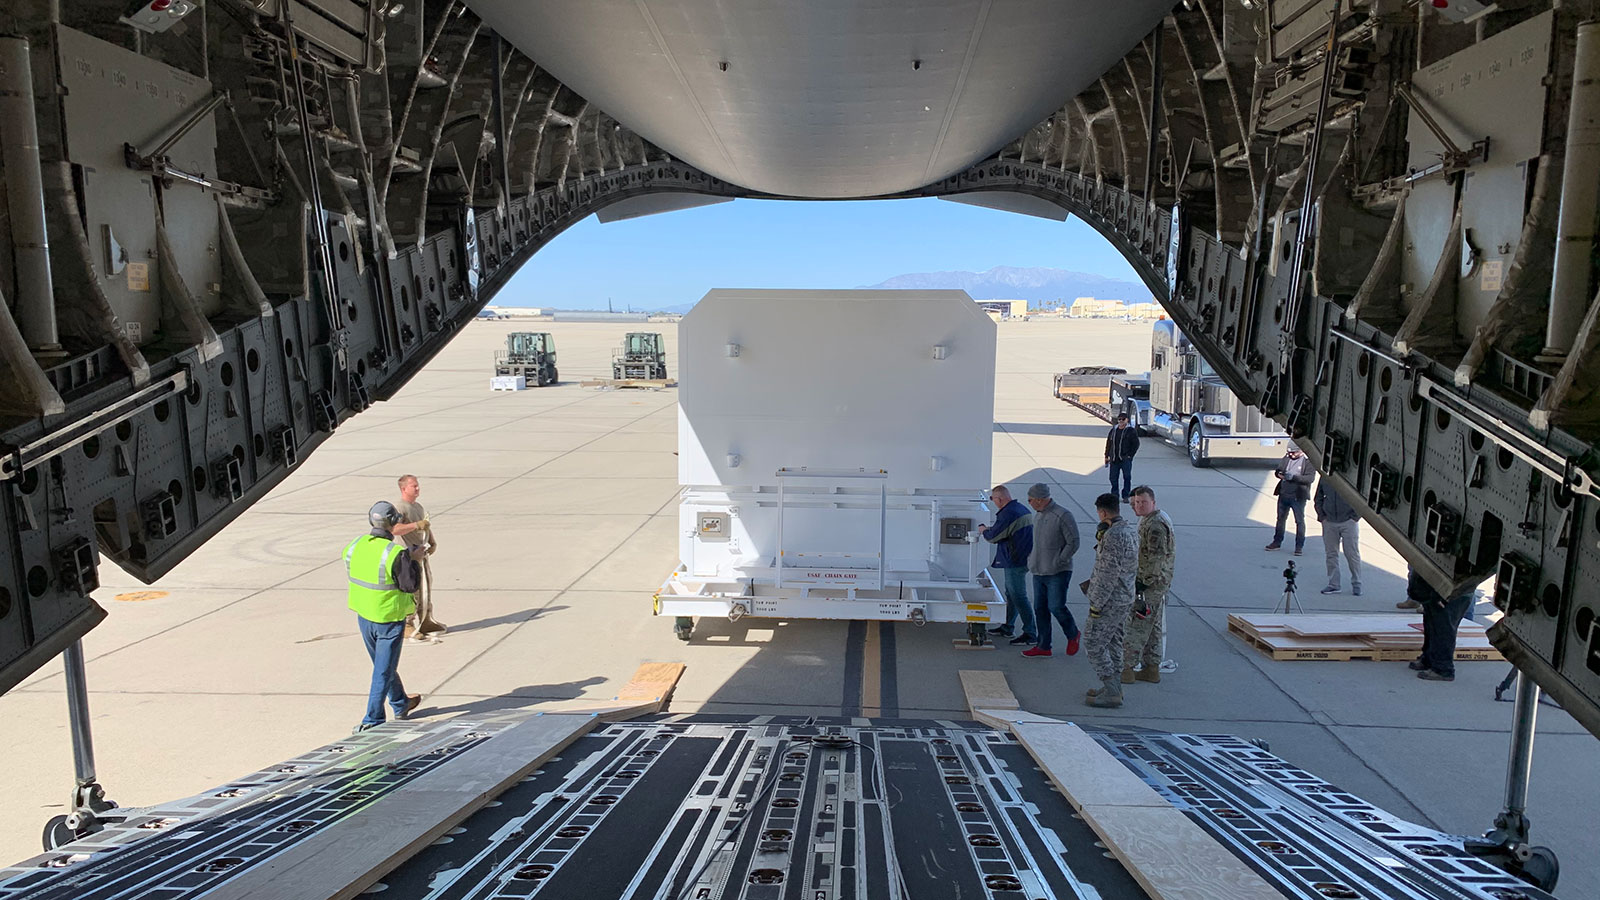 The shipping container carrying NASA's Mars 2020 rover is readied for loading aboard an Air Force C-17 transport plane at March Air Reserve Base in Riverside, California, on Feb. 11, 2020.